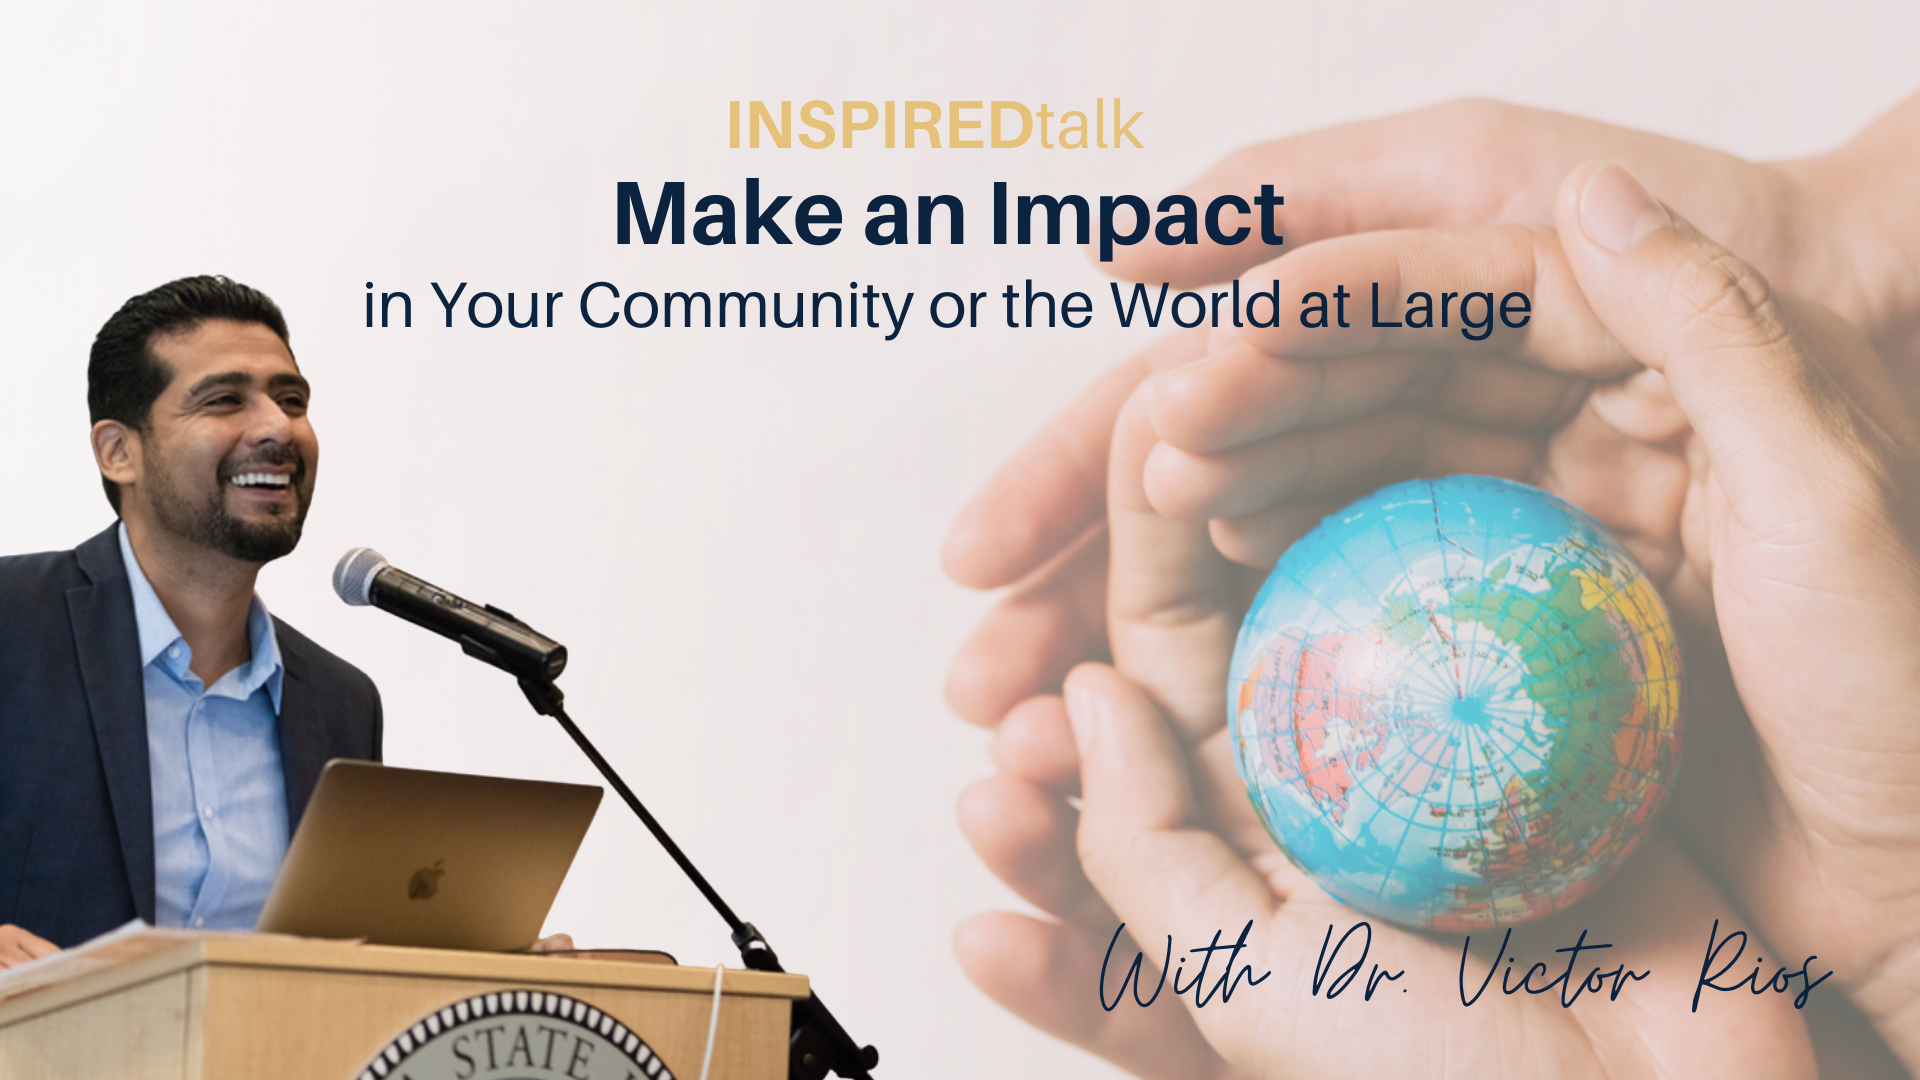 Watch the INSPIREDtalk: Make an Impact with Dr. Victor Rios